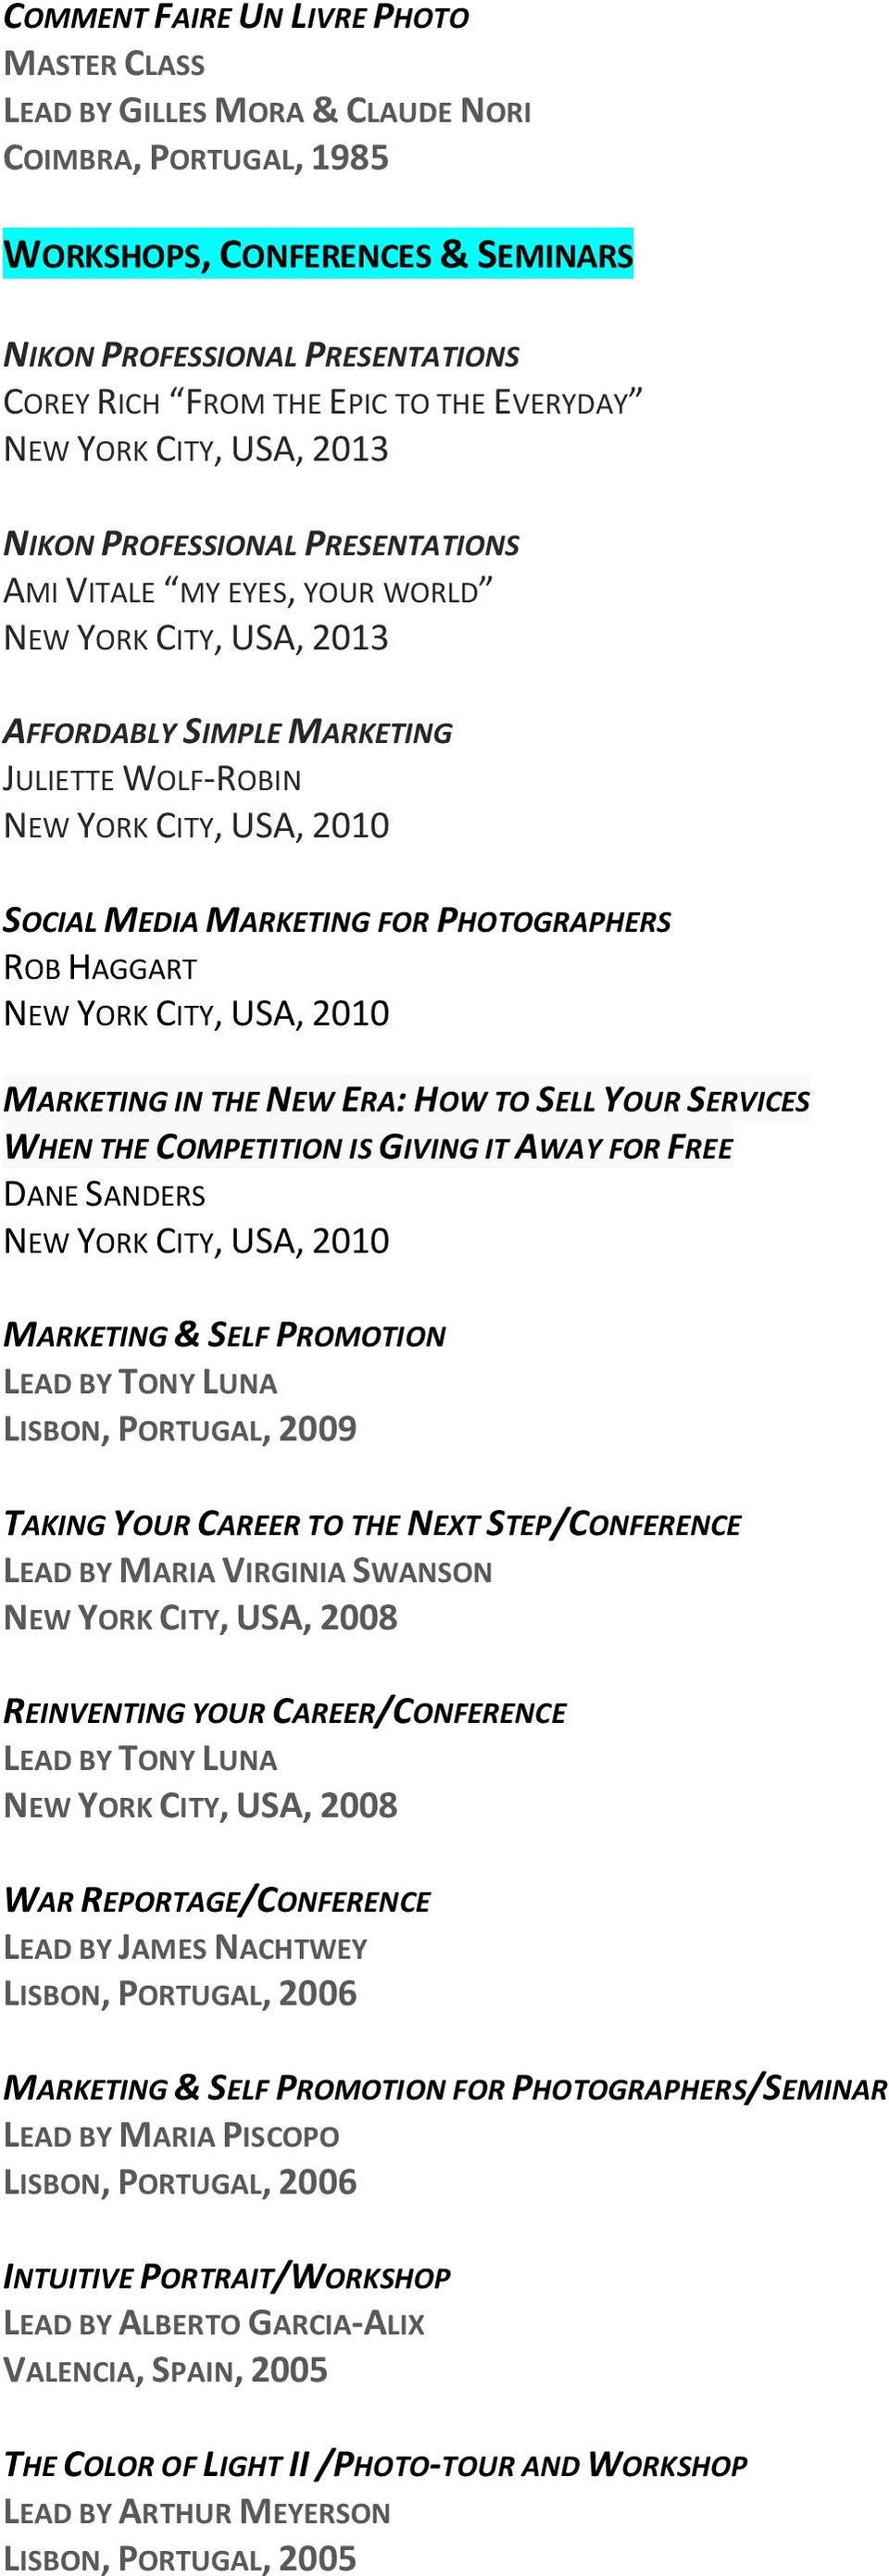 SOCIAL MEDIA MARKETING FOR PHOTOGRAPHERS ROB HAGGART NEW YORK CITY, USA, 2010 MARKETING IN THE NEW ERA: HOW TO SELL YOUR SERVICES WHEN THE COMPETITION IS GIVING IT AWAY FOR FREE DANE SANDERS NEW YORK